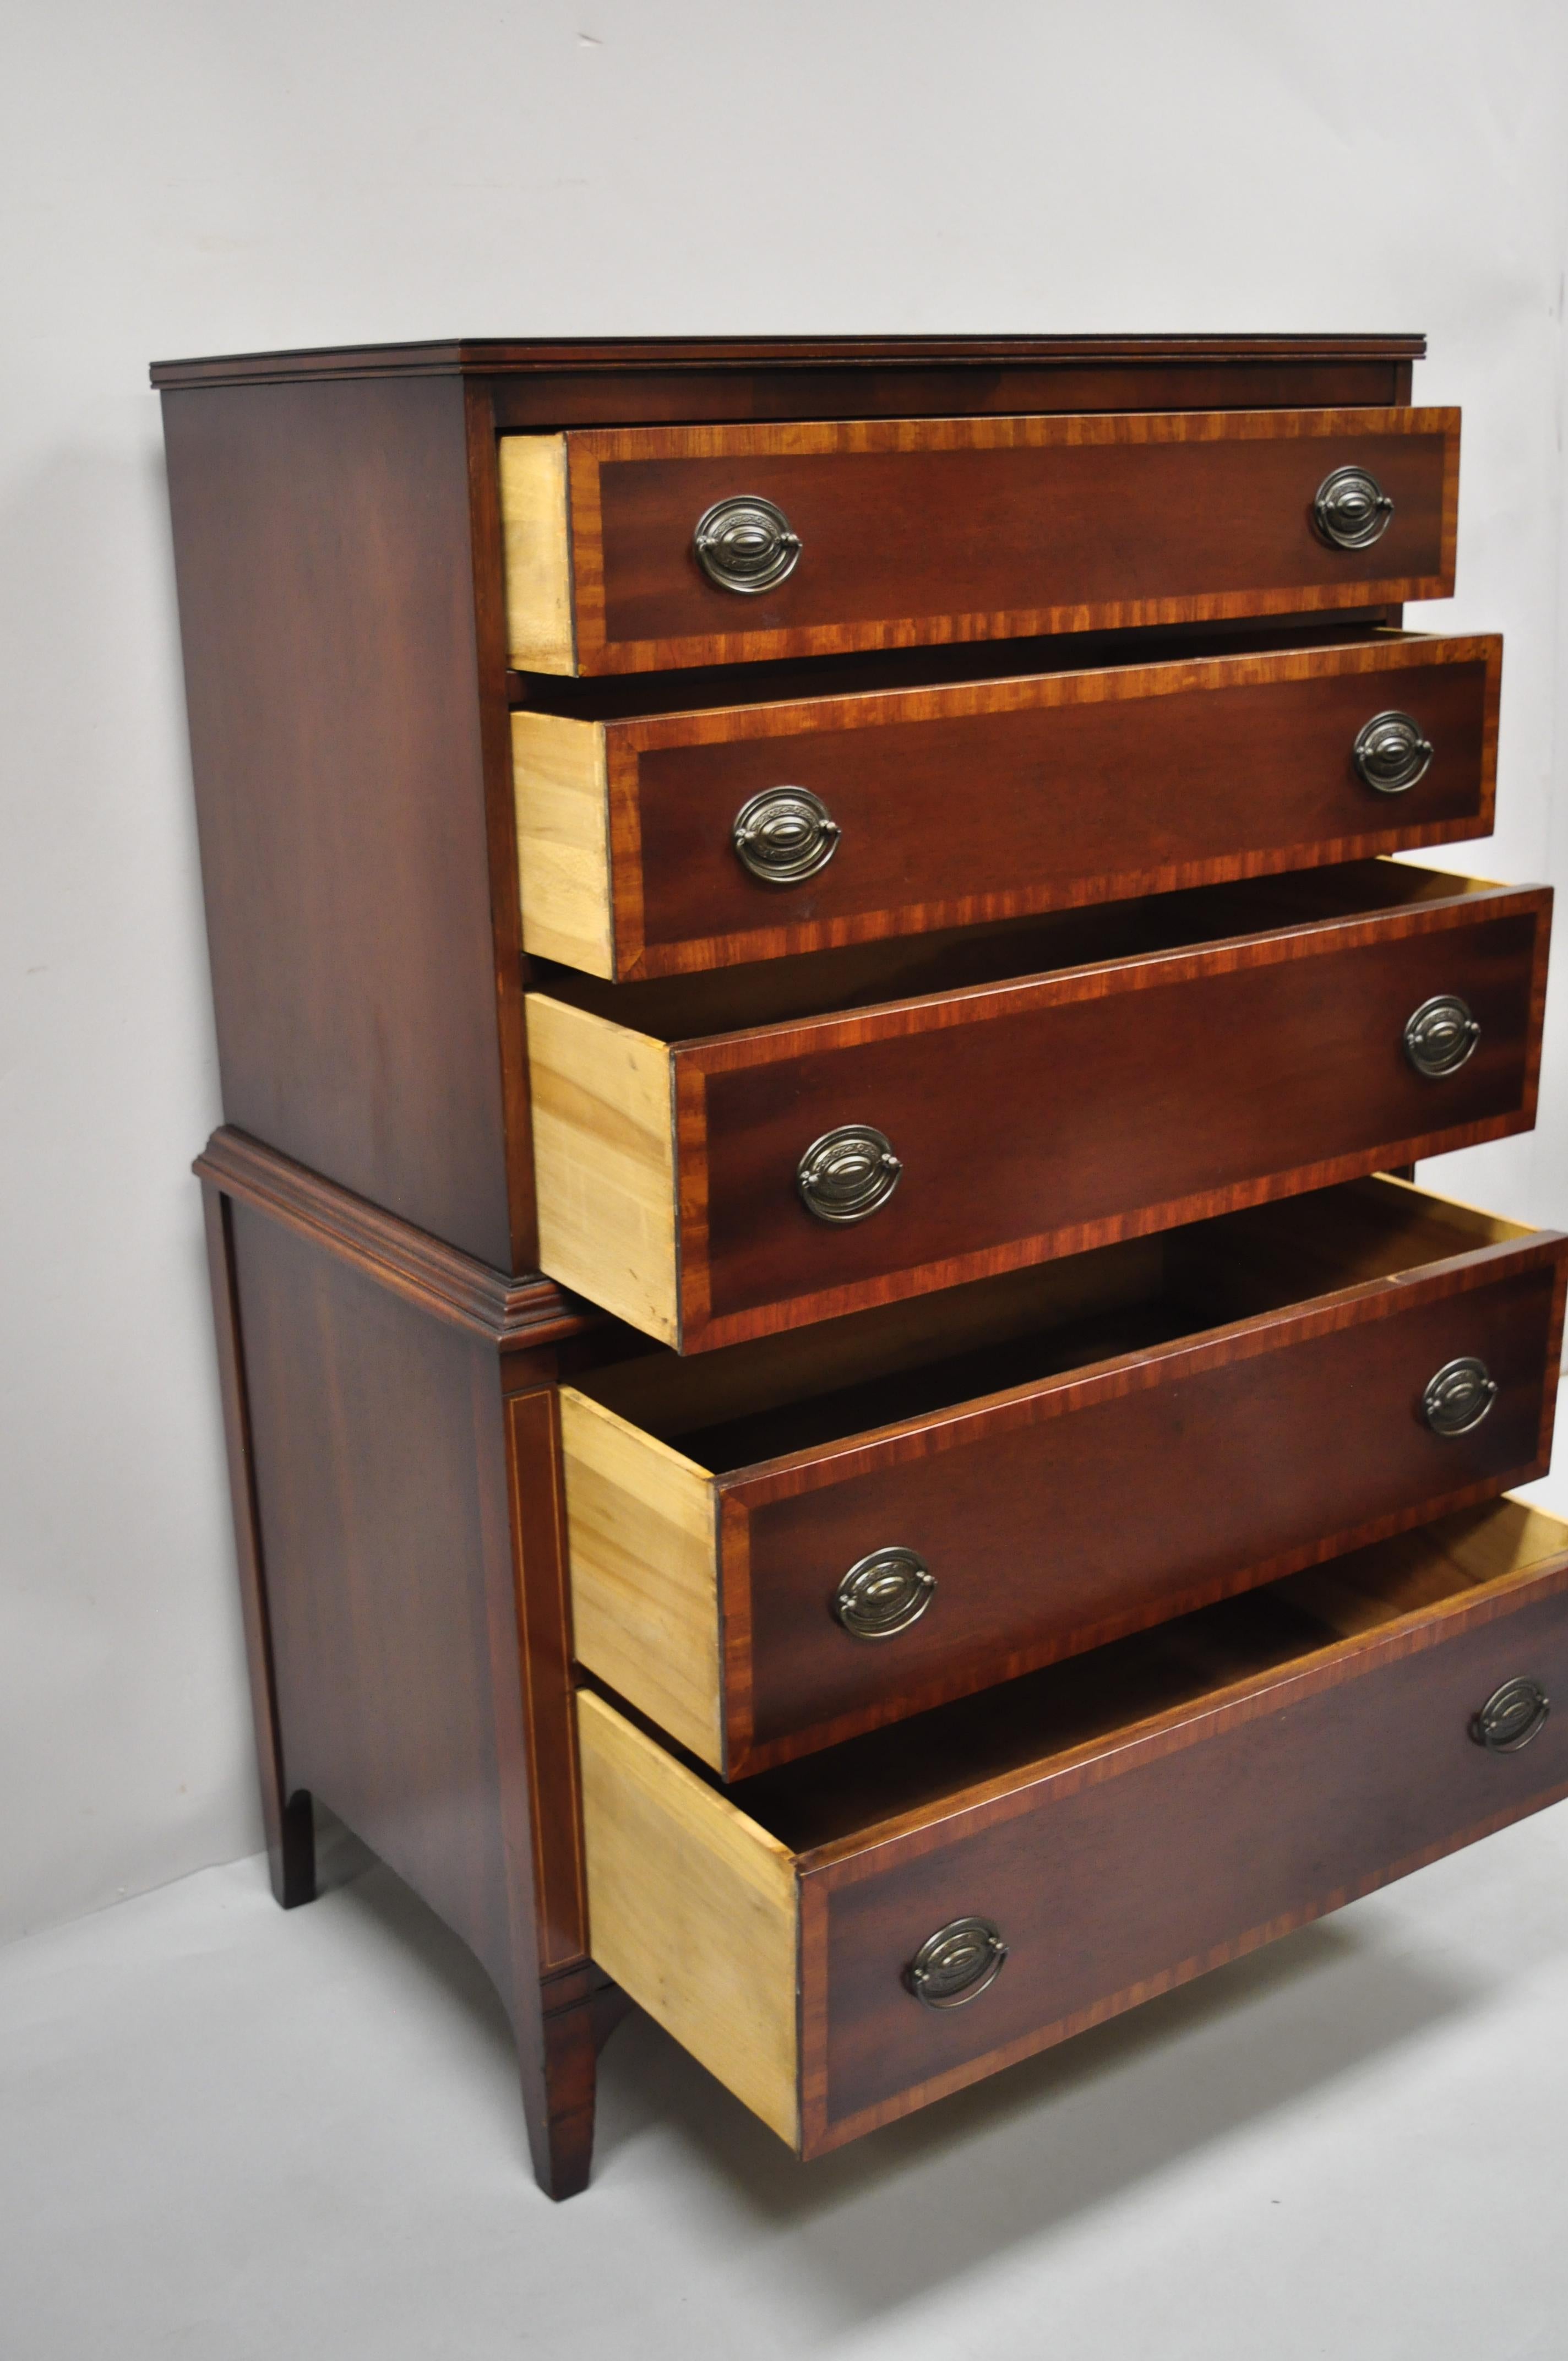 Vintage Mahogany 5 Drawer Banded Inlay Tall Chest Dresser Highboy by Stiehl 1